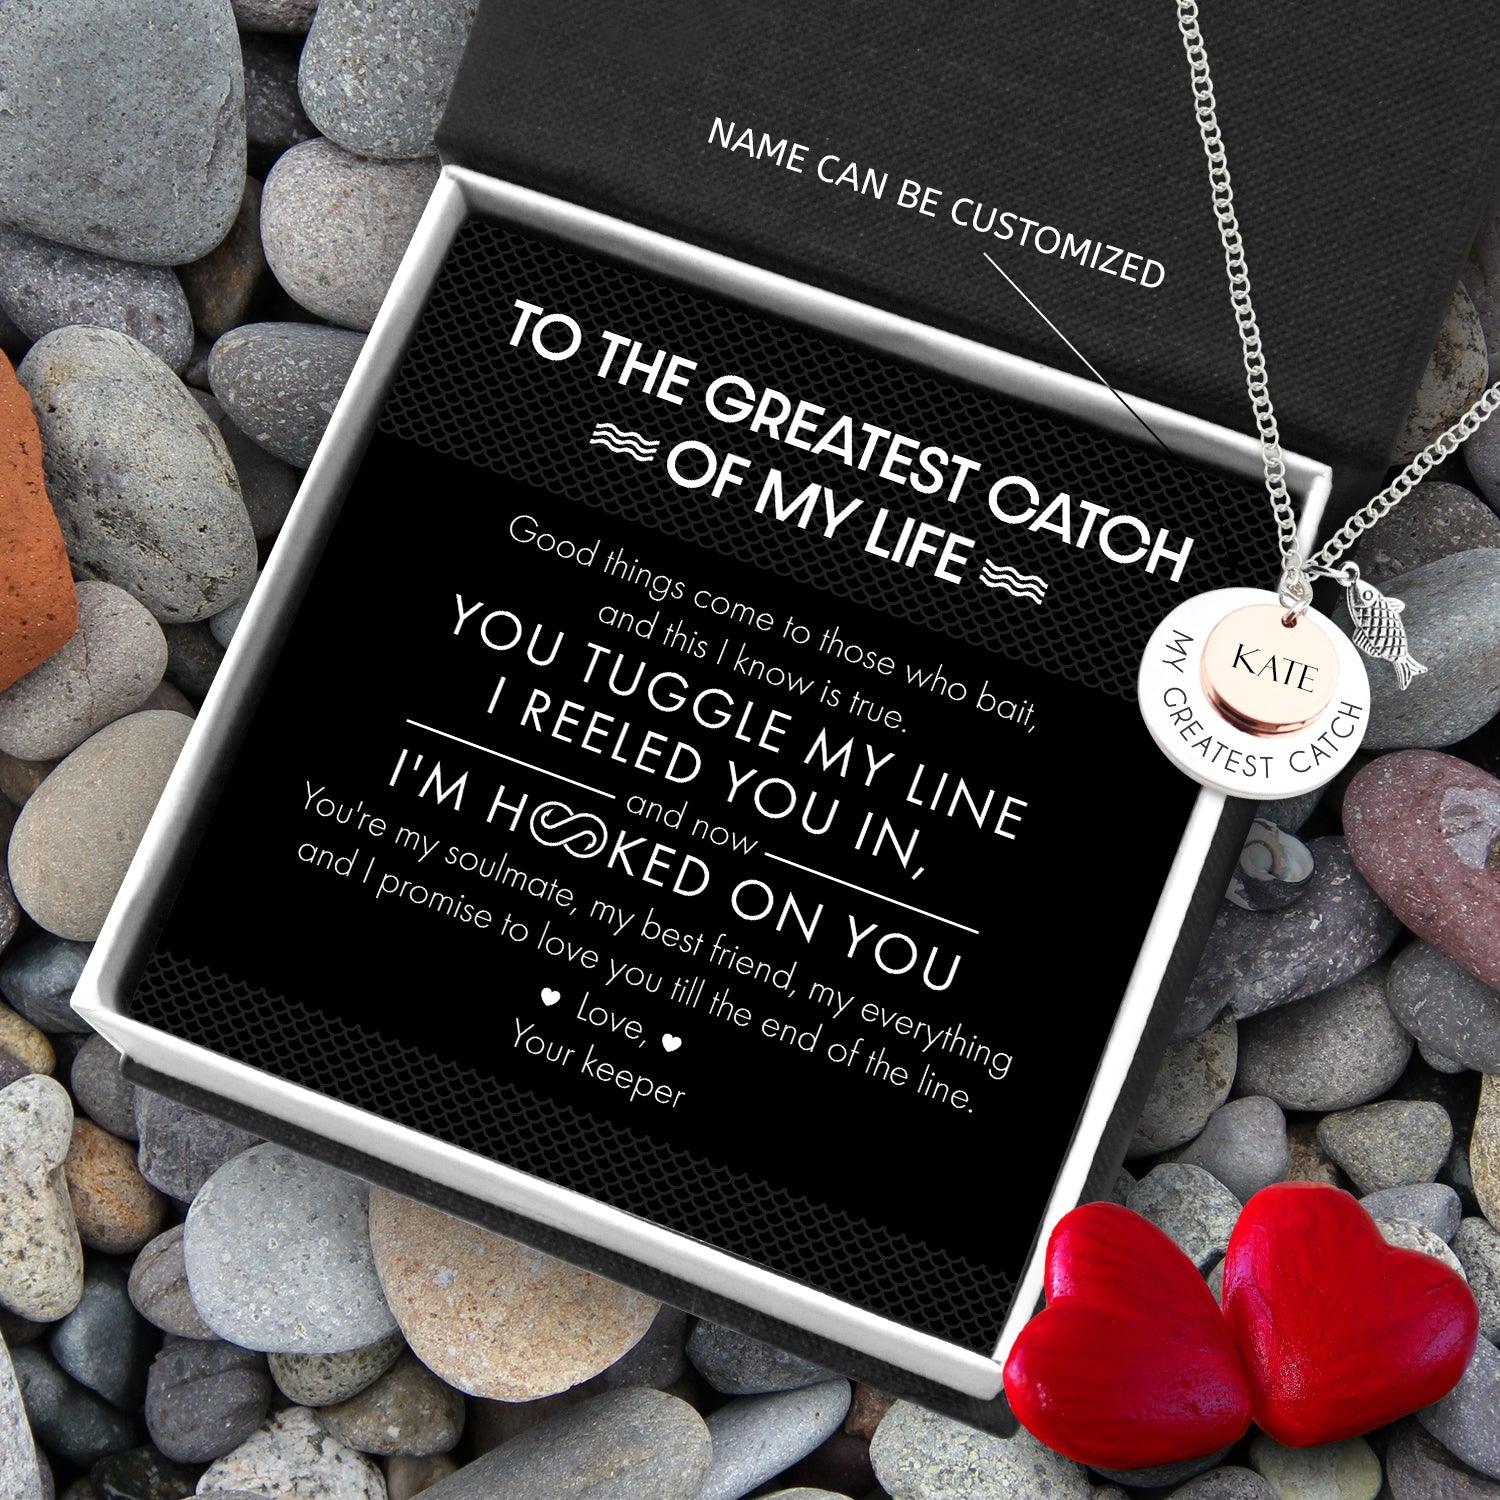 Personalised Fishing Double Round Pendants Necklace - Fishing - To The Greatest Catch - I Reeled You In - Augngb13004 - Gifts Holder